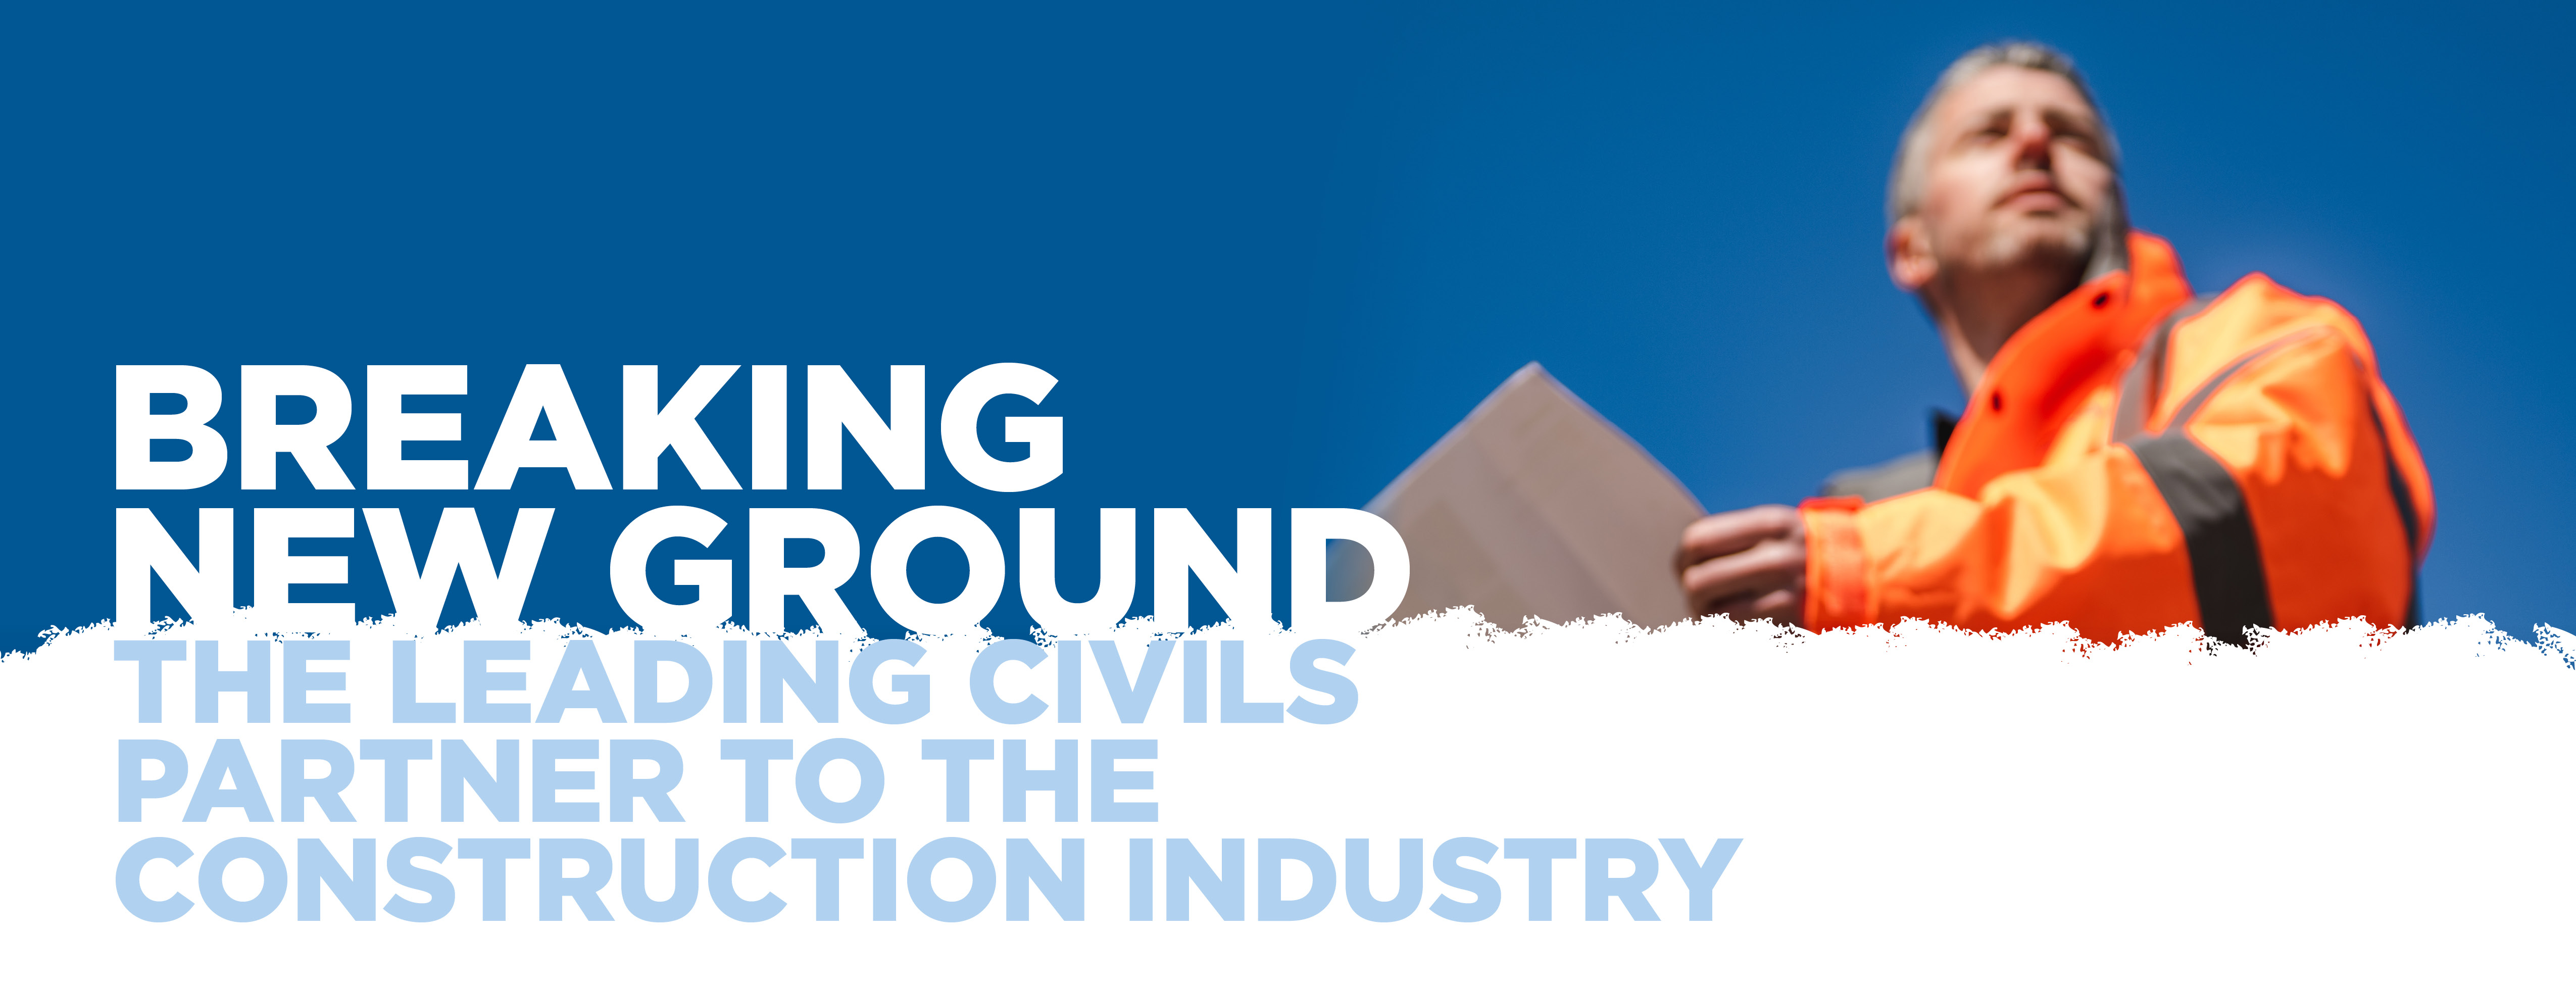 Breaking New Ground The Leading Civils Partner to the Construction Industry 